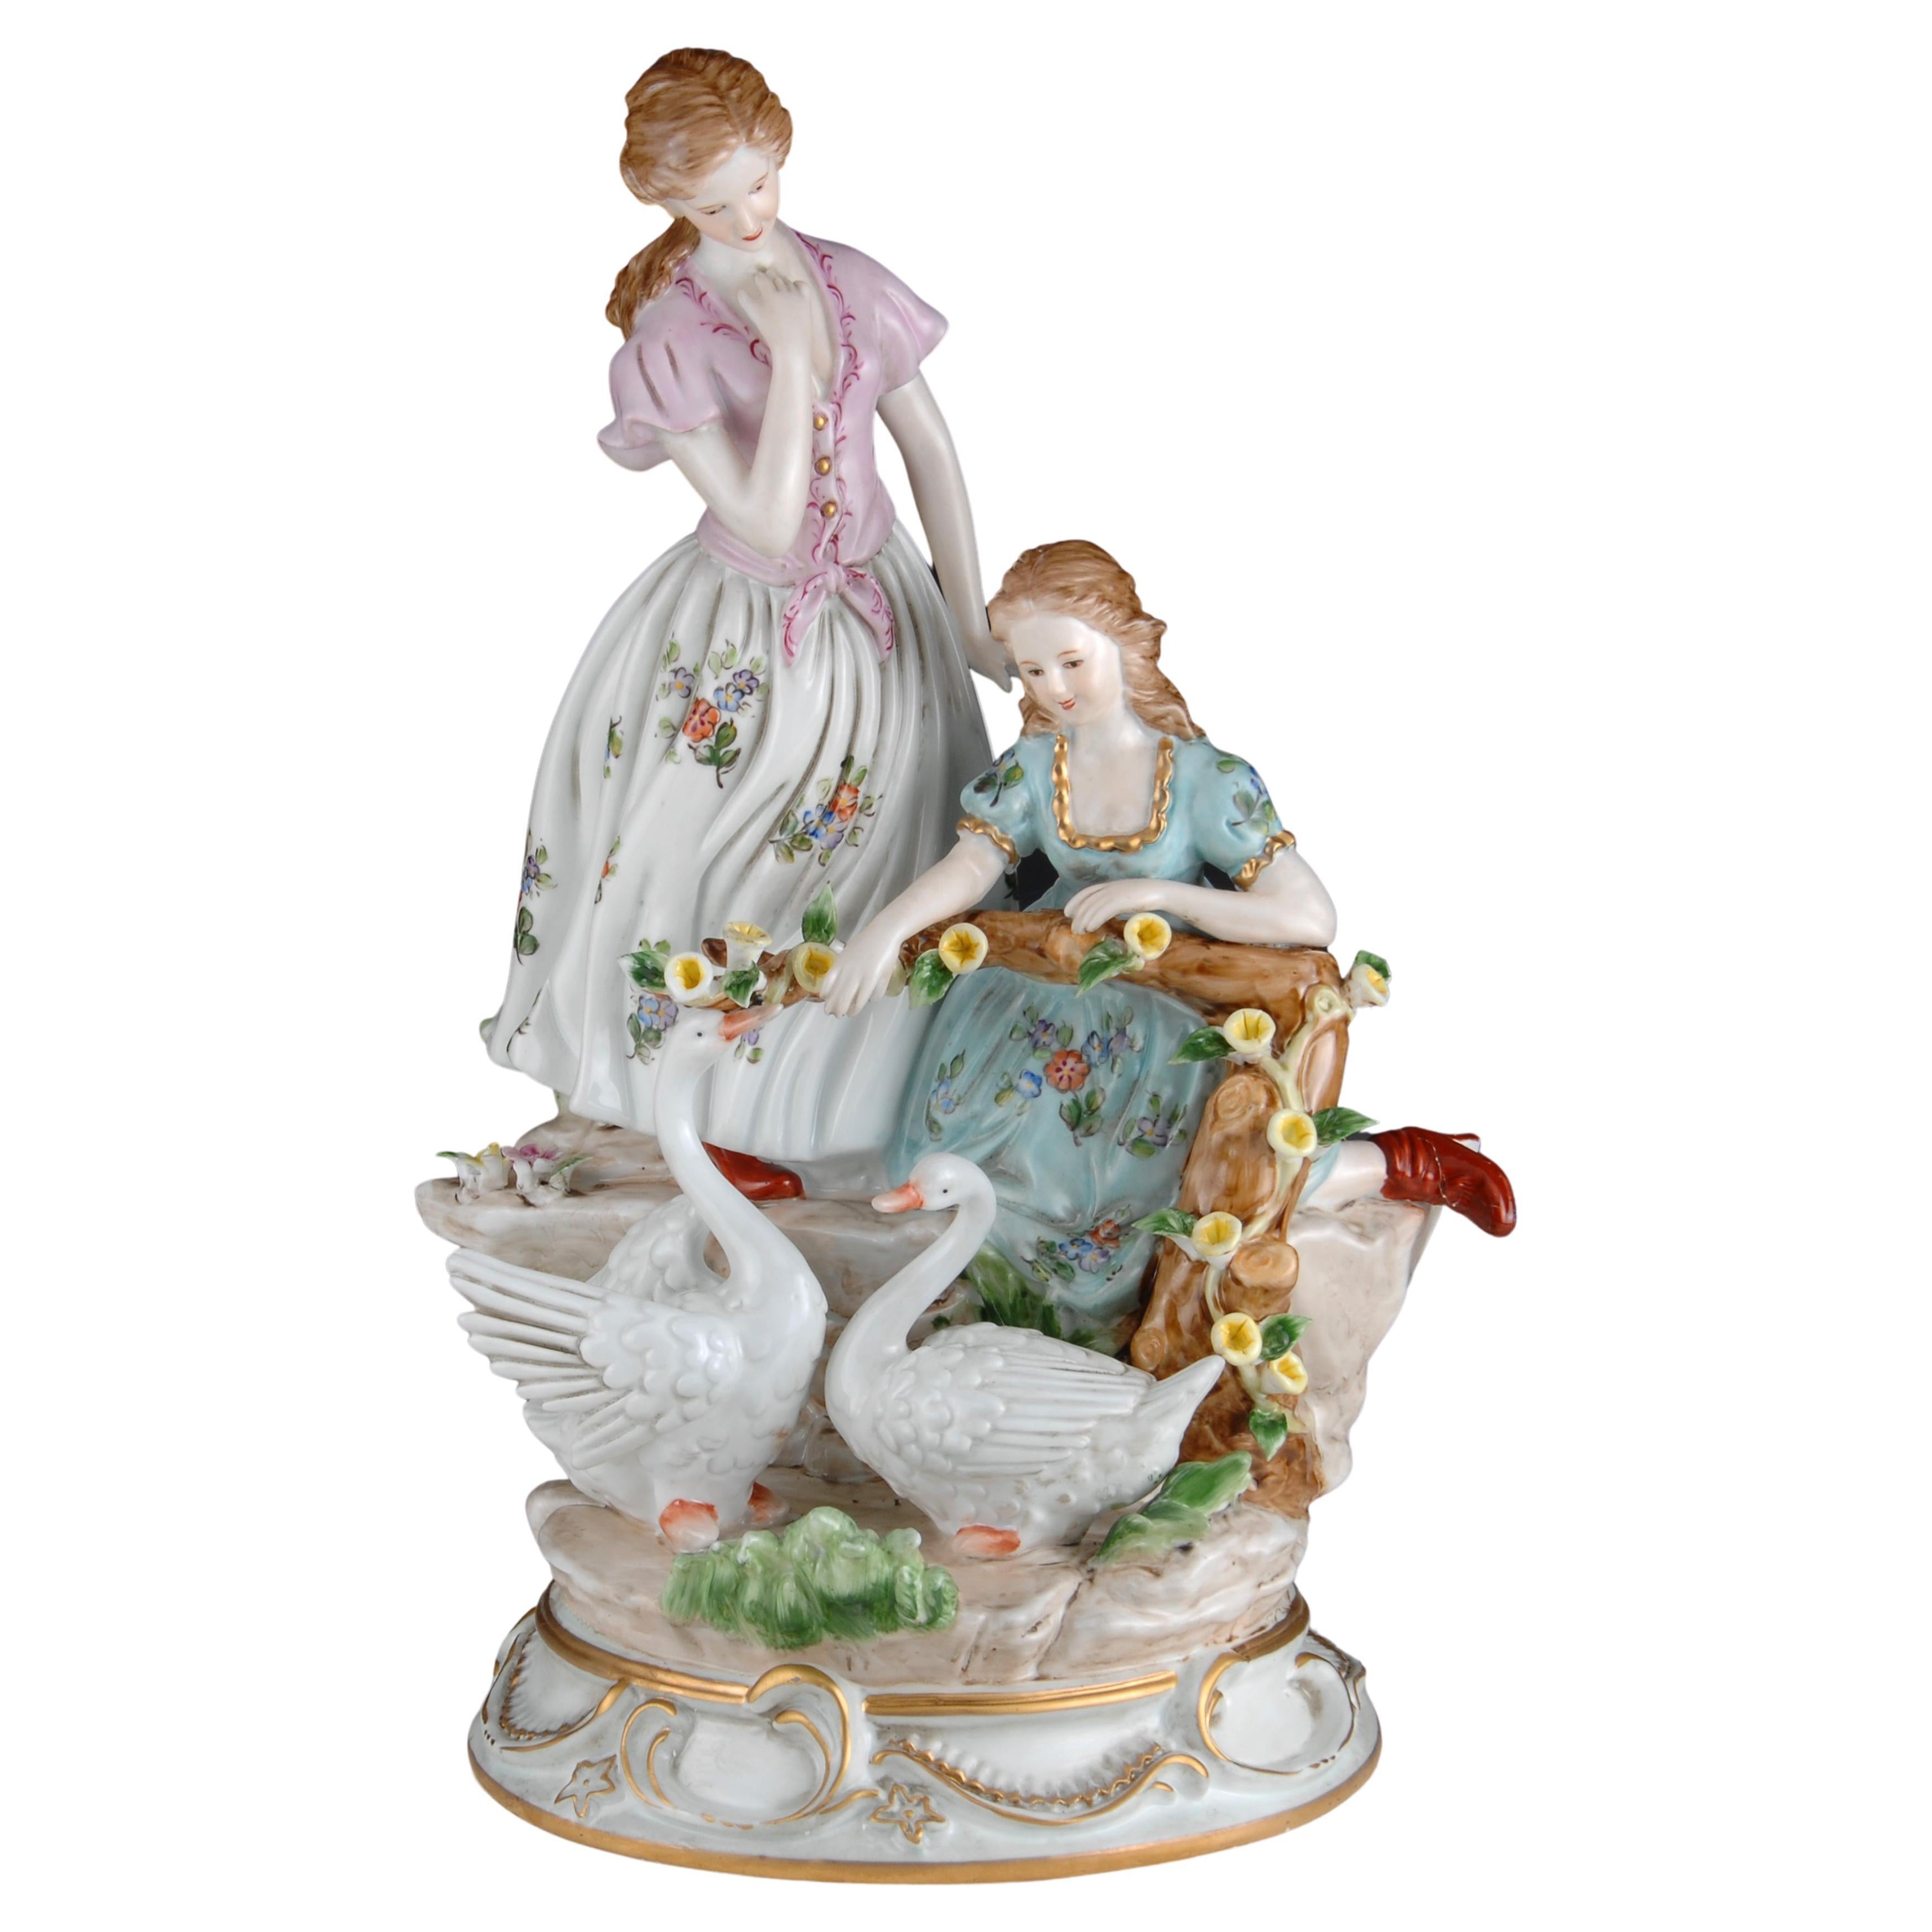 Ladies with Swans, Porcelain, After Models from Sèvres